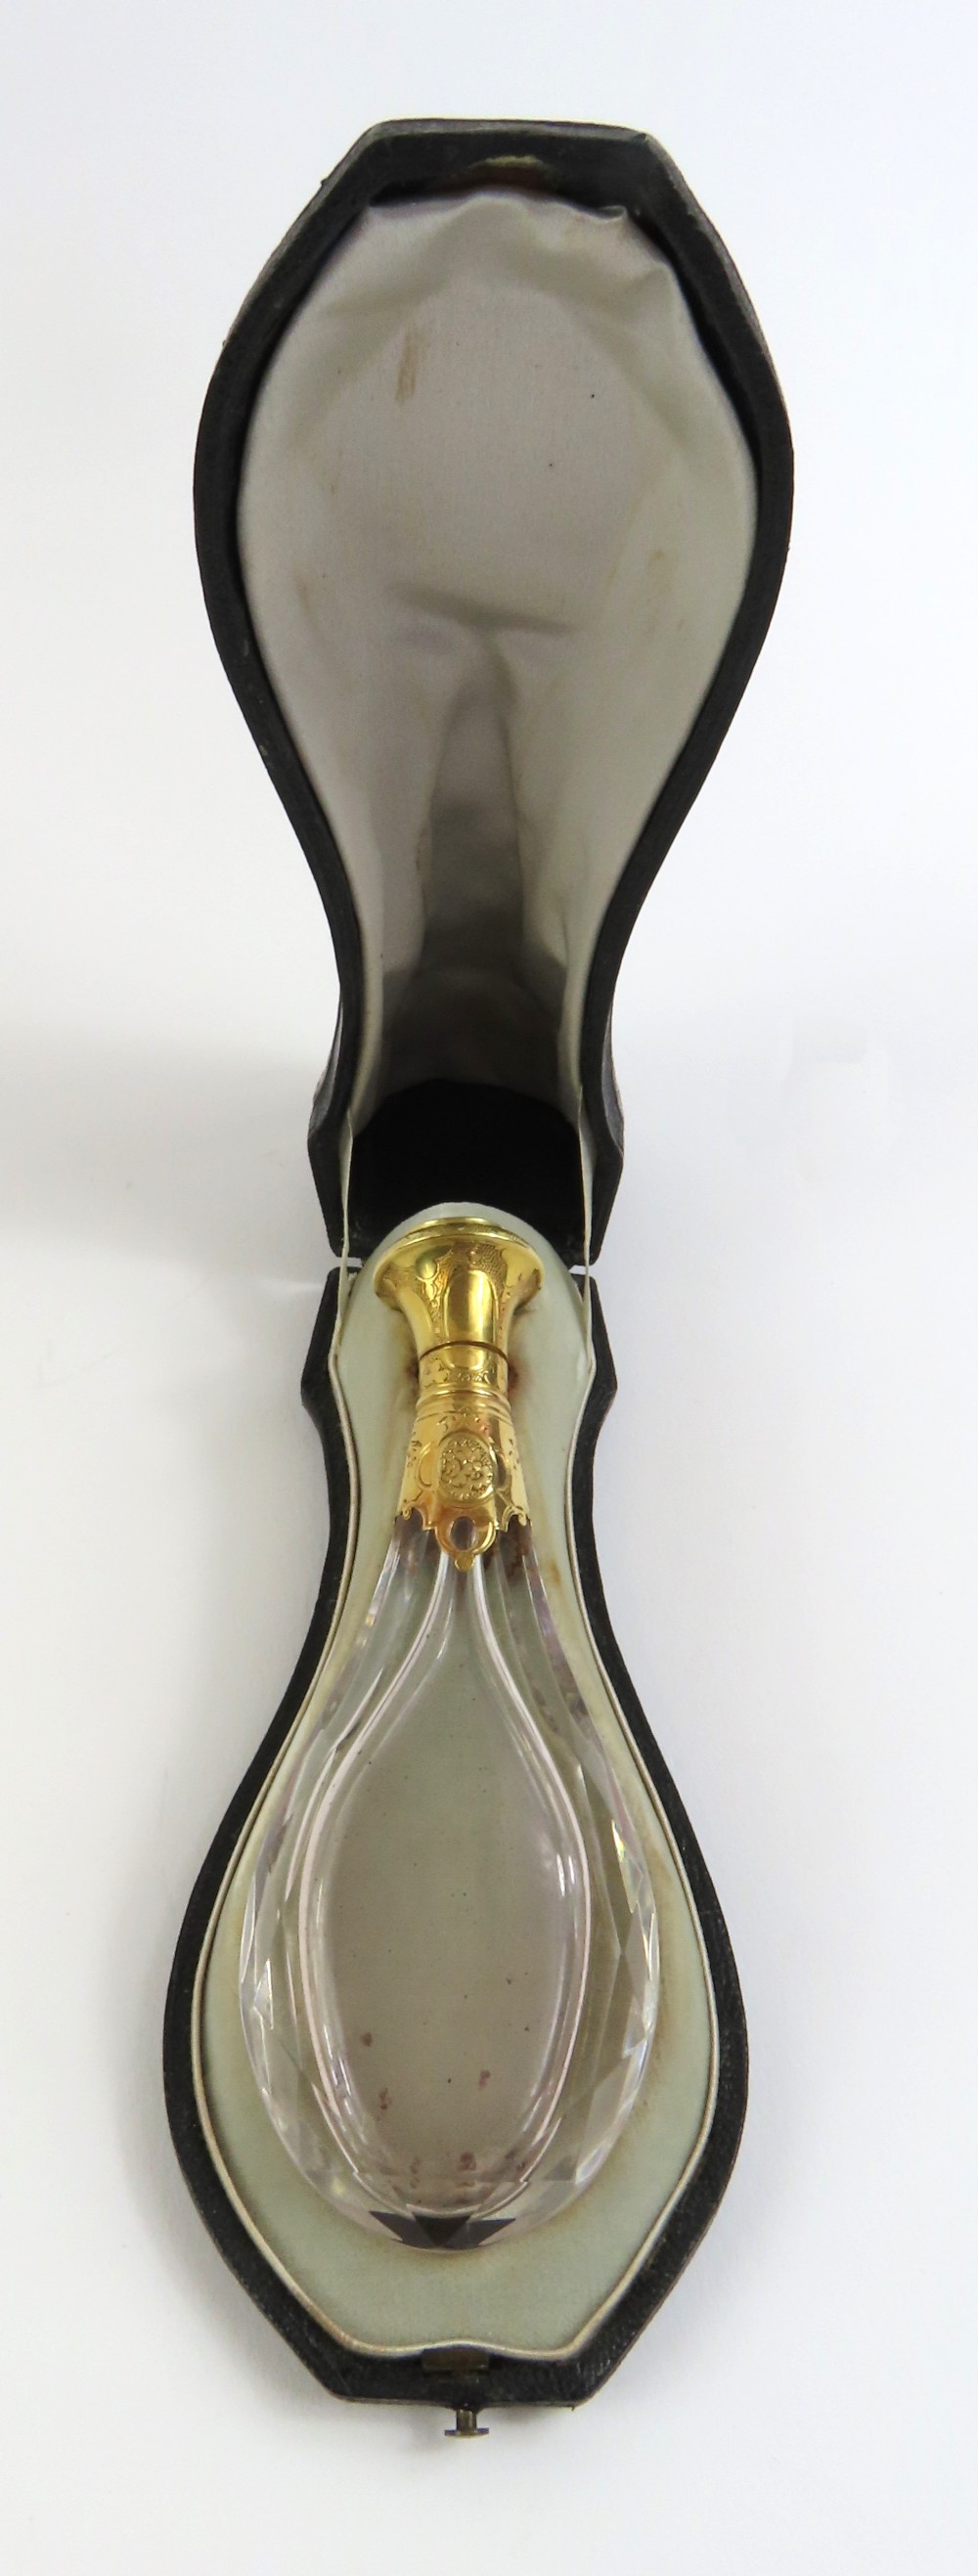 A 19th century French scent bottle, with a gold to